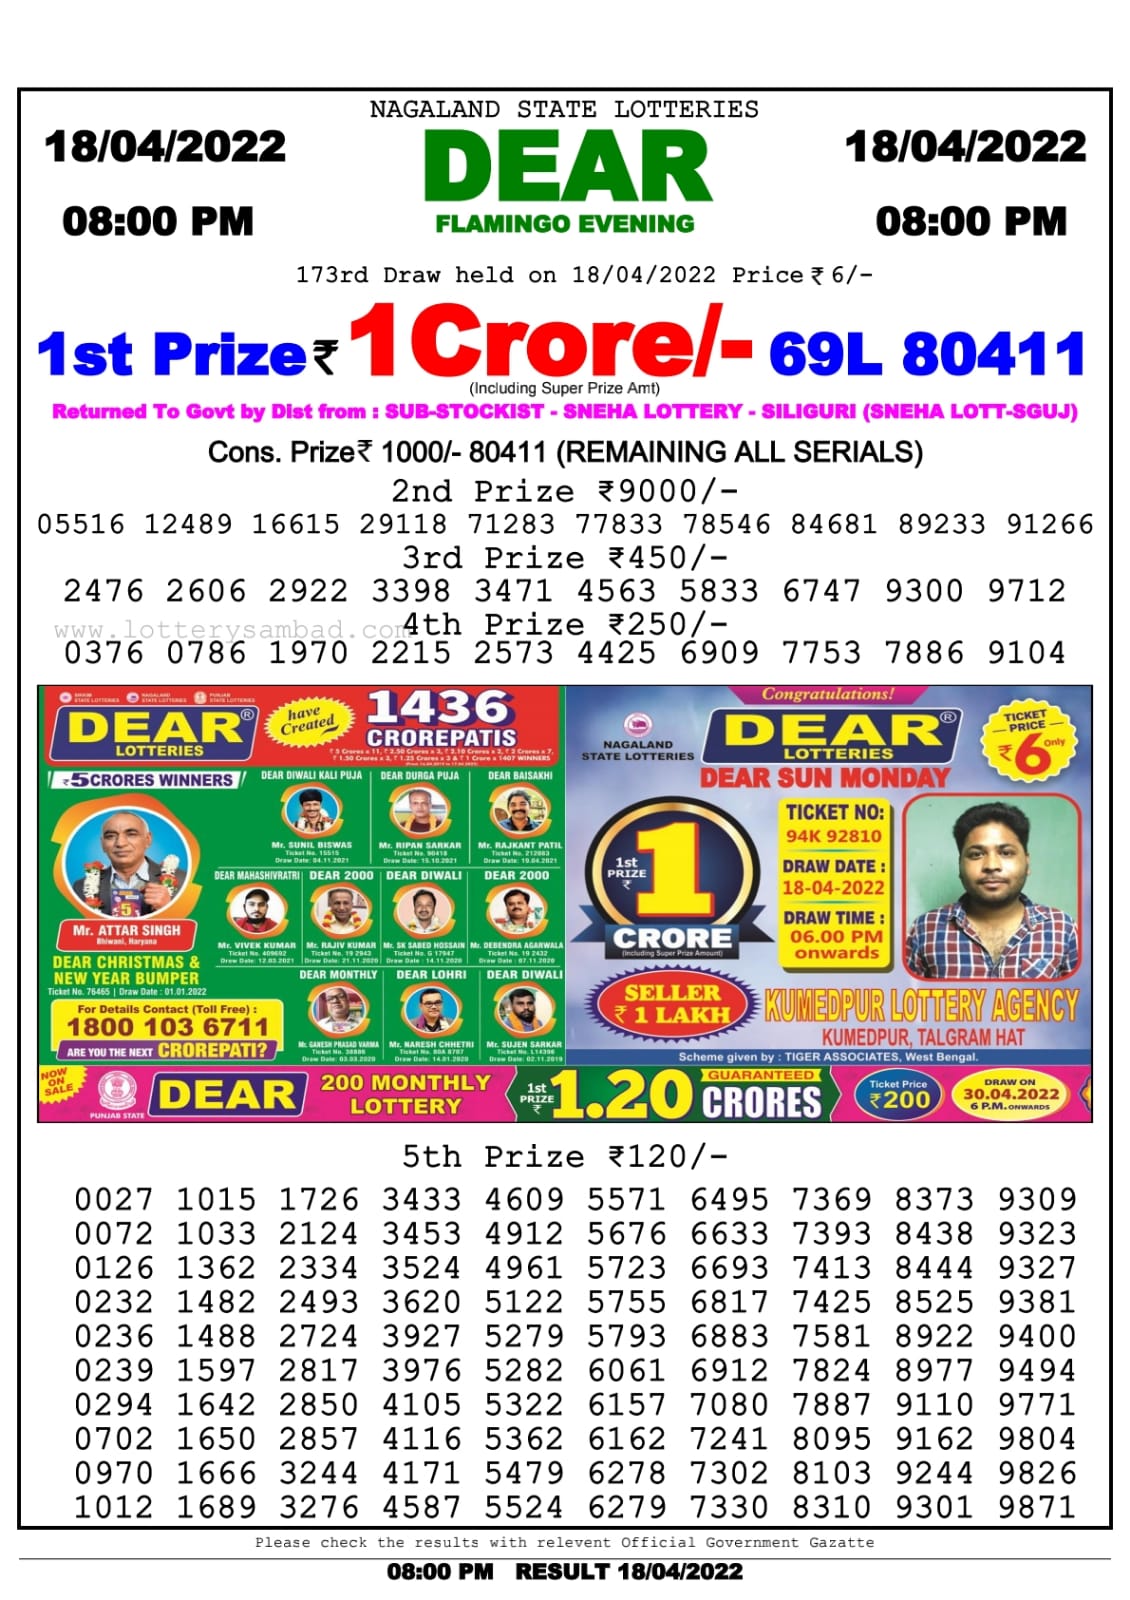 Dear Lottery Nagaland state Lottery Results 08.00 pm 18.04.2022